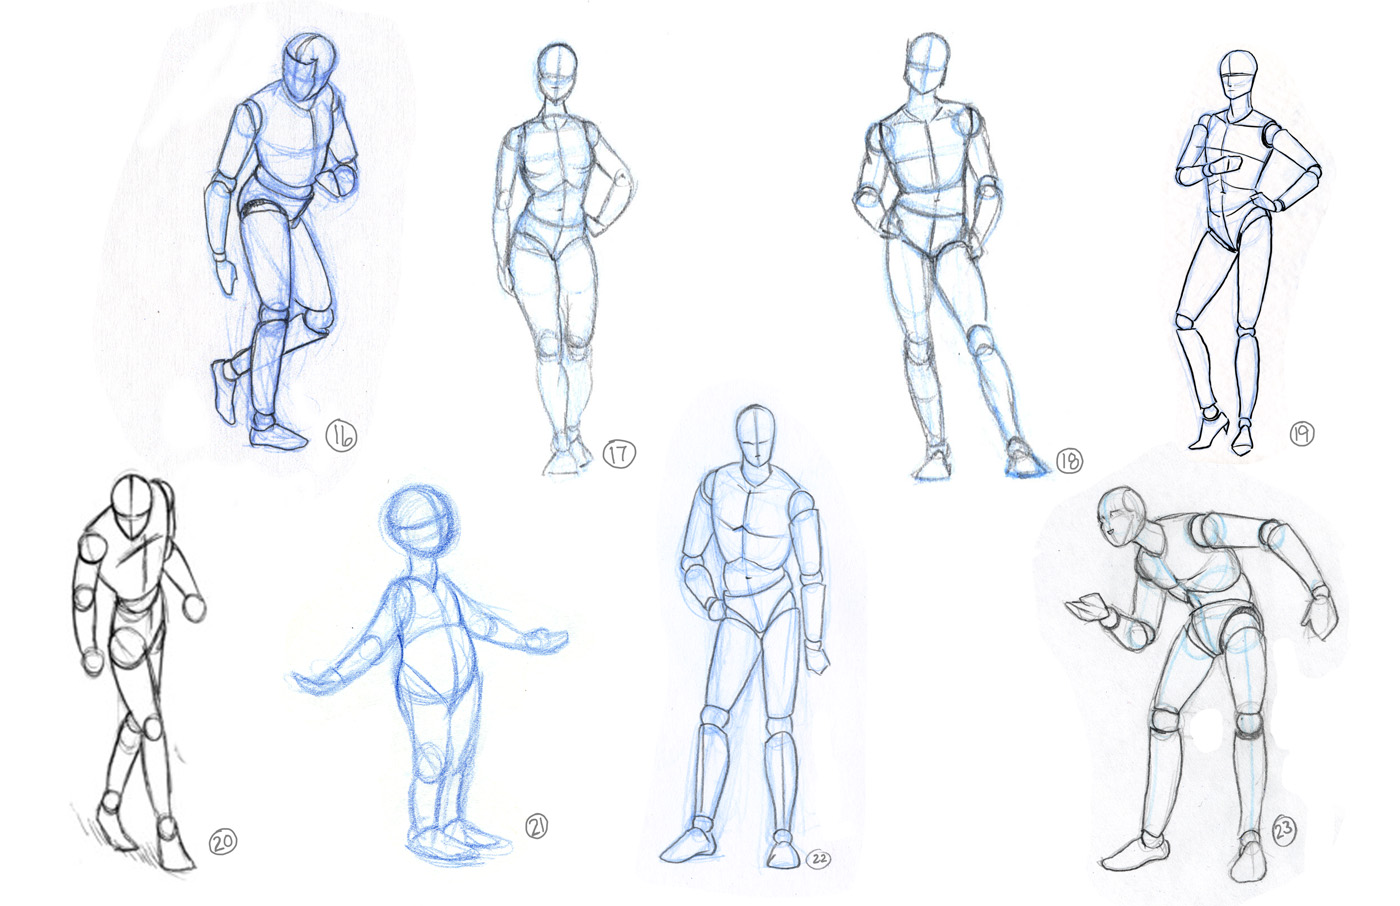 How To Draw Human Figure For Beginners Pencil Sketch - vrogue.co